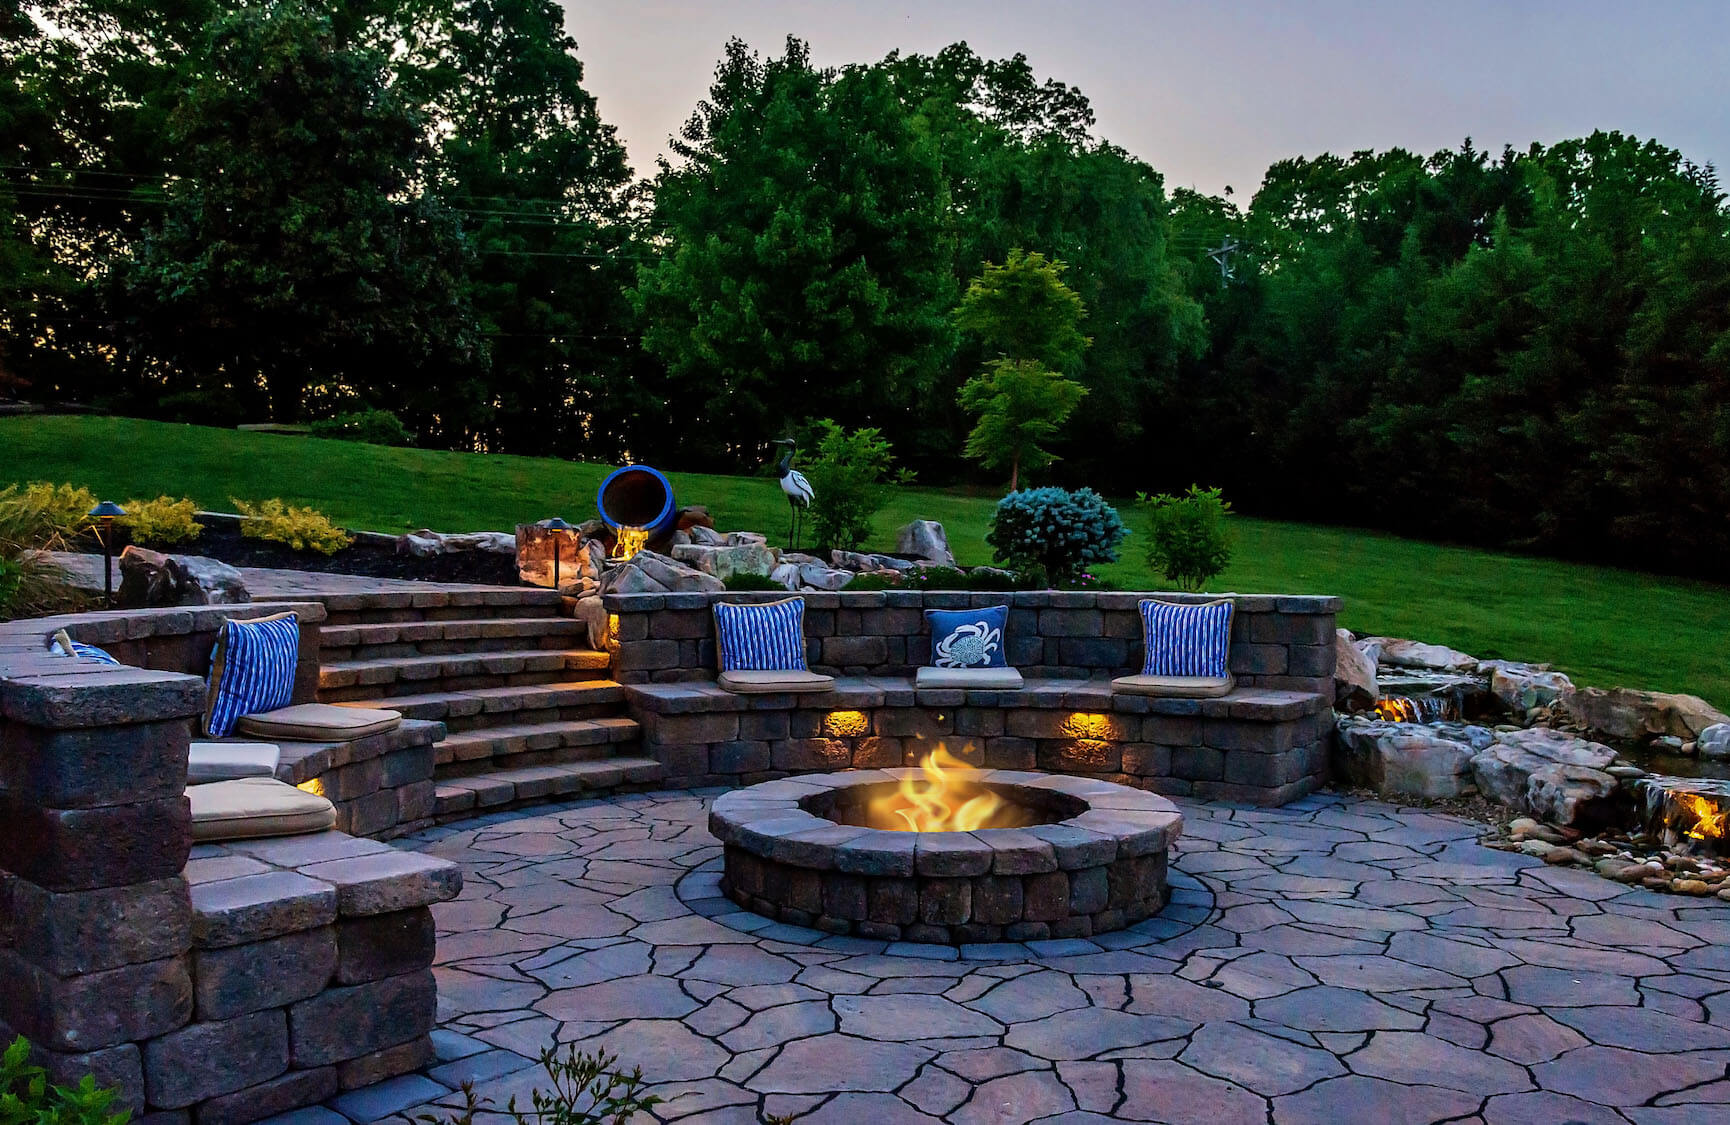 Landscaped Residential Property in Knoxville with Fire Pit